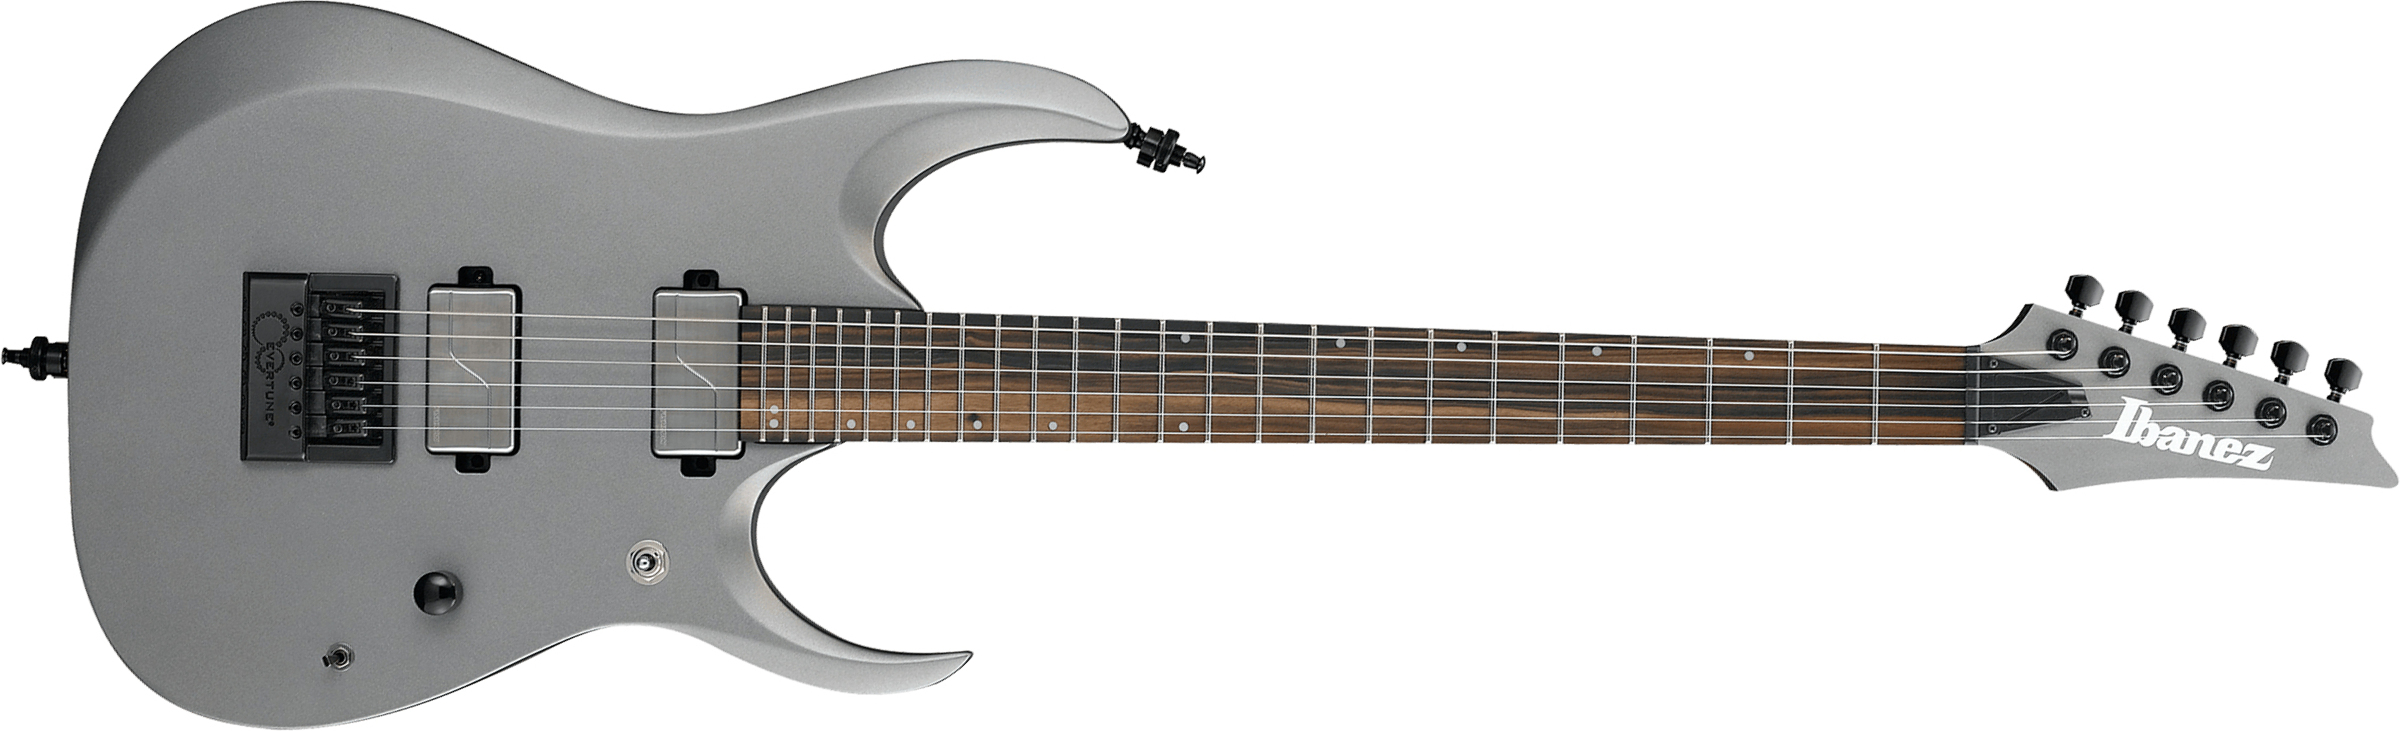 Ibanez Rgd61alet Mgm Axion Label Hh Fishman Fluence Ht Evertune Eb - Metallic Gray Matte - E-Gitarre in Str-Form - Main picture